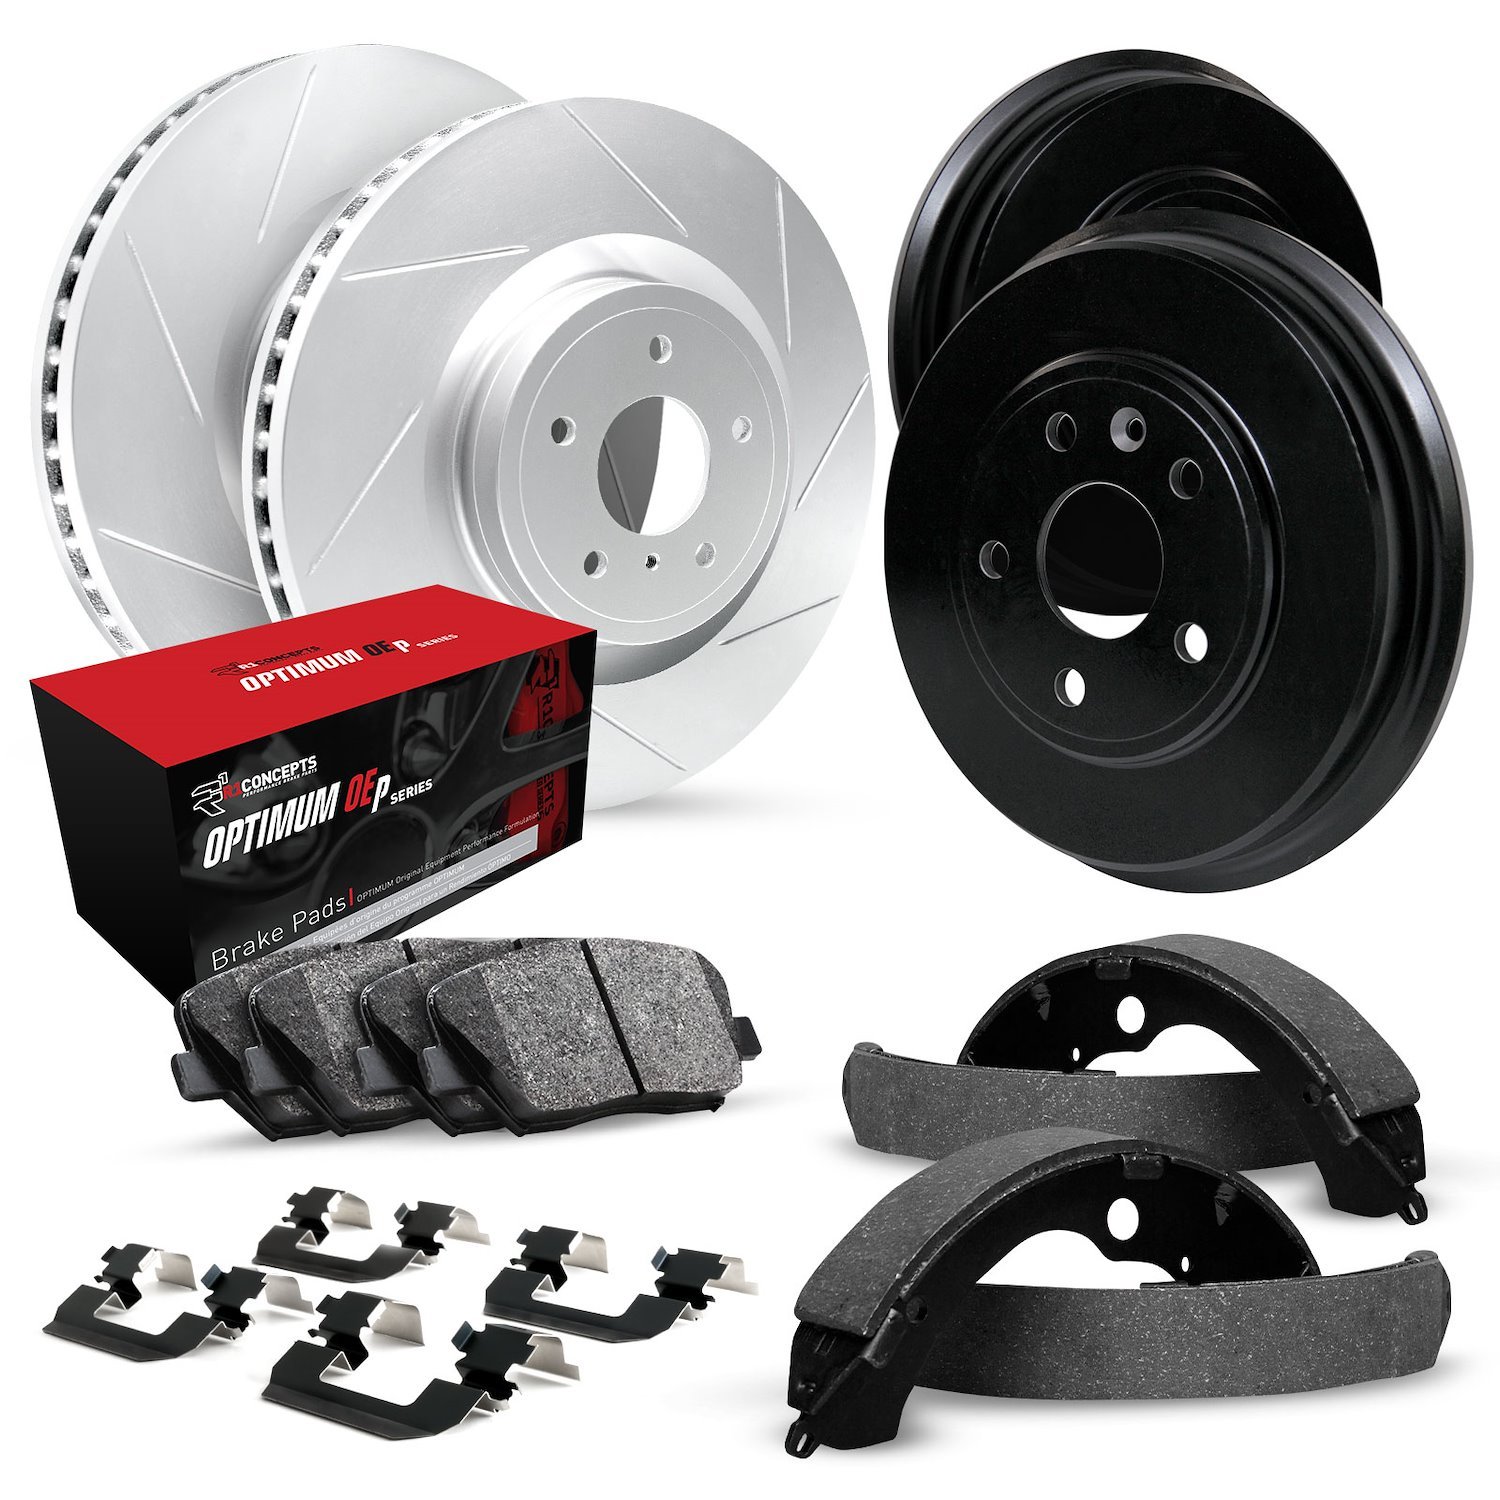 GEO-Carbon Slotted Brake Rotor & Drum Set w/Optimum OE Pads, Shoes, & Hardware, 2010-2013 Ford/Lincoln/Mercury/Mazda